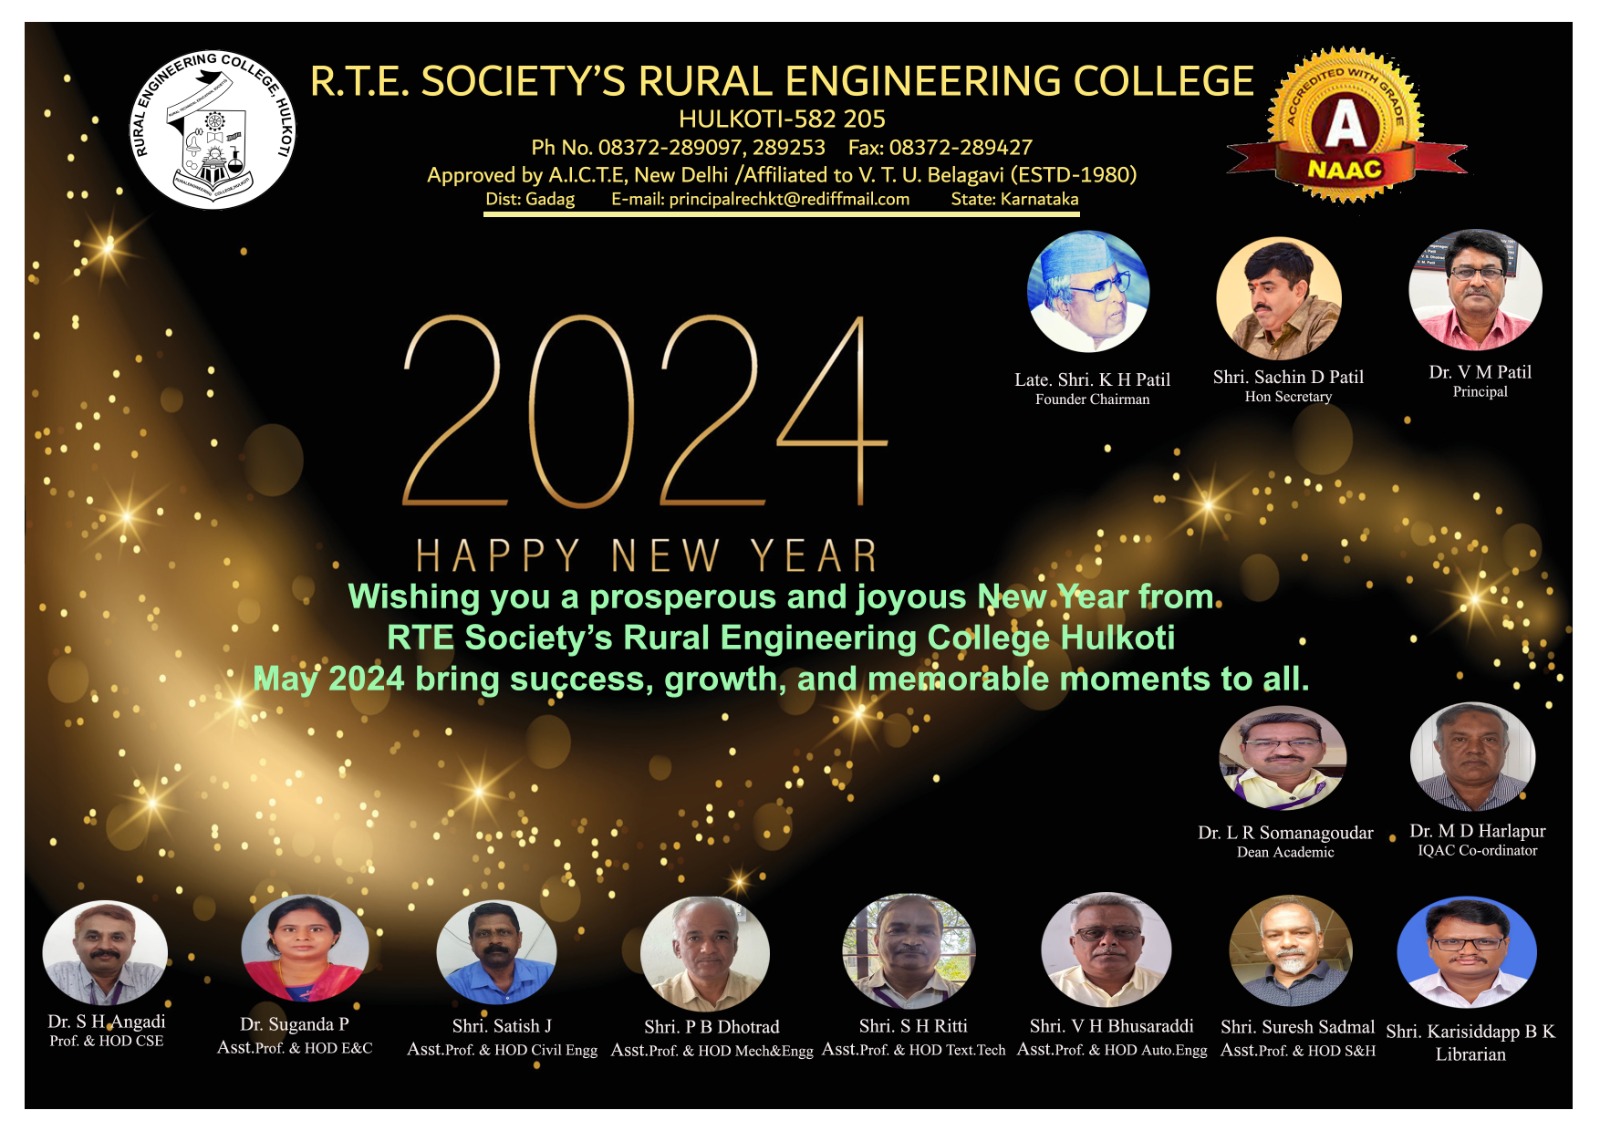 REC wishing you all a Happy New Year 2024